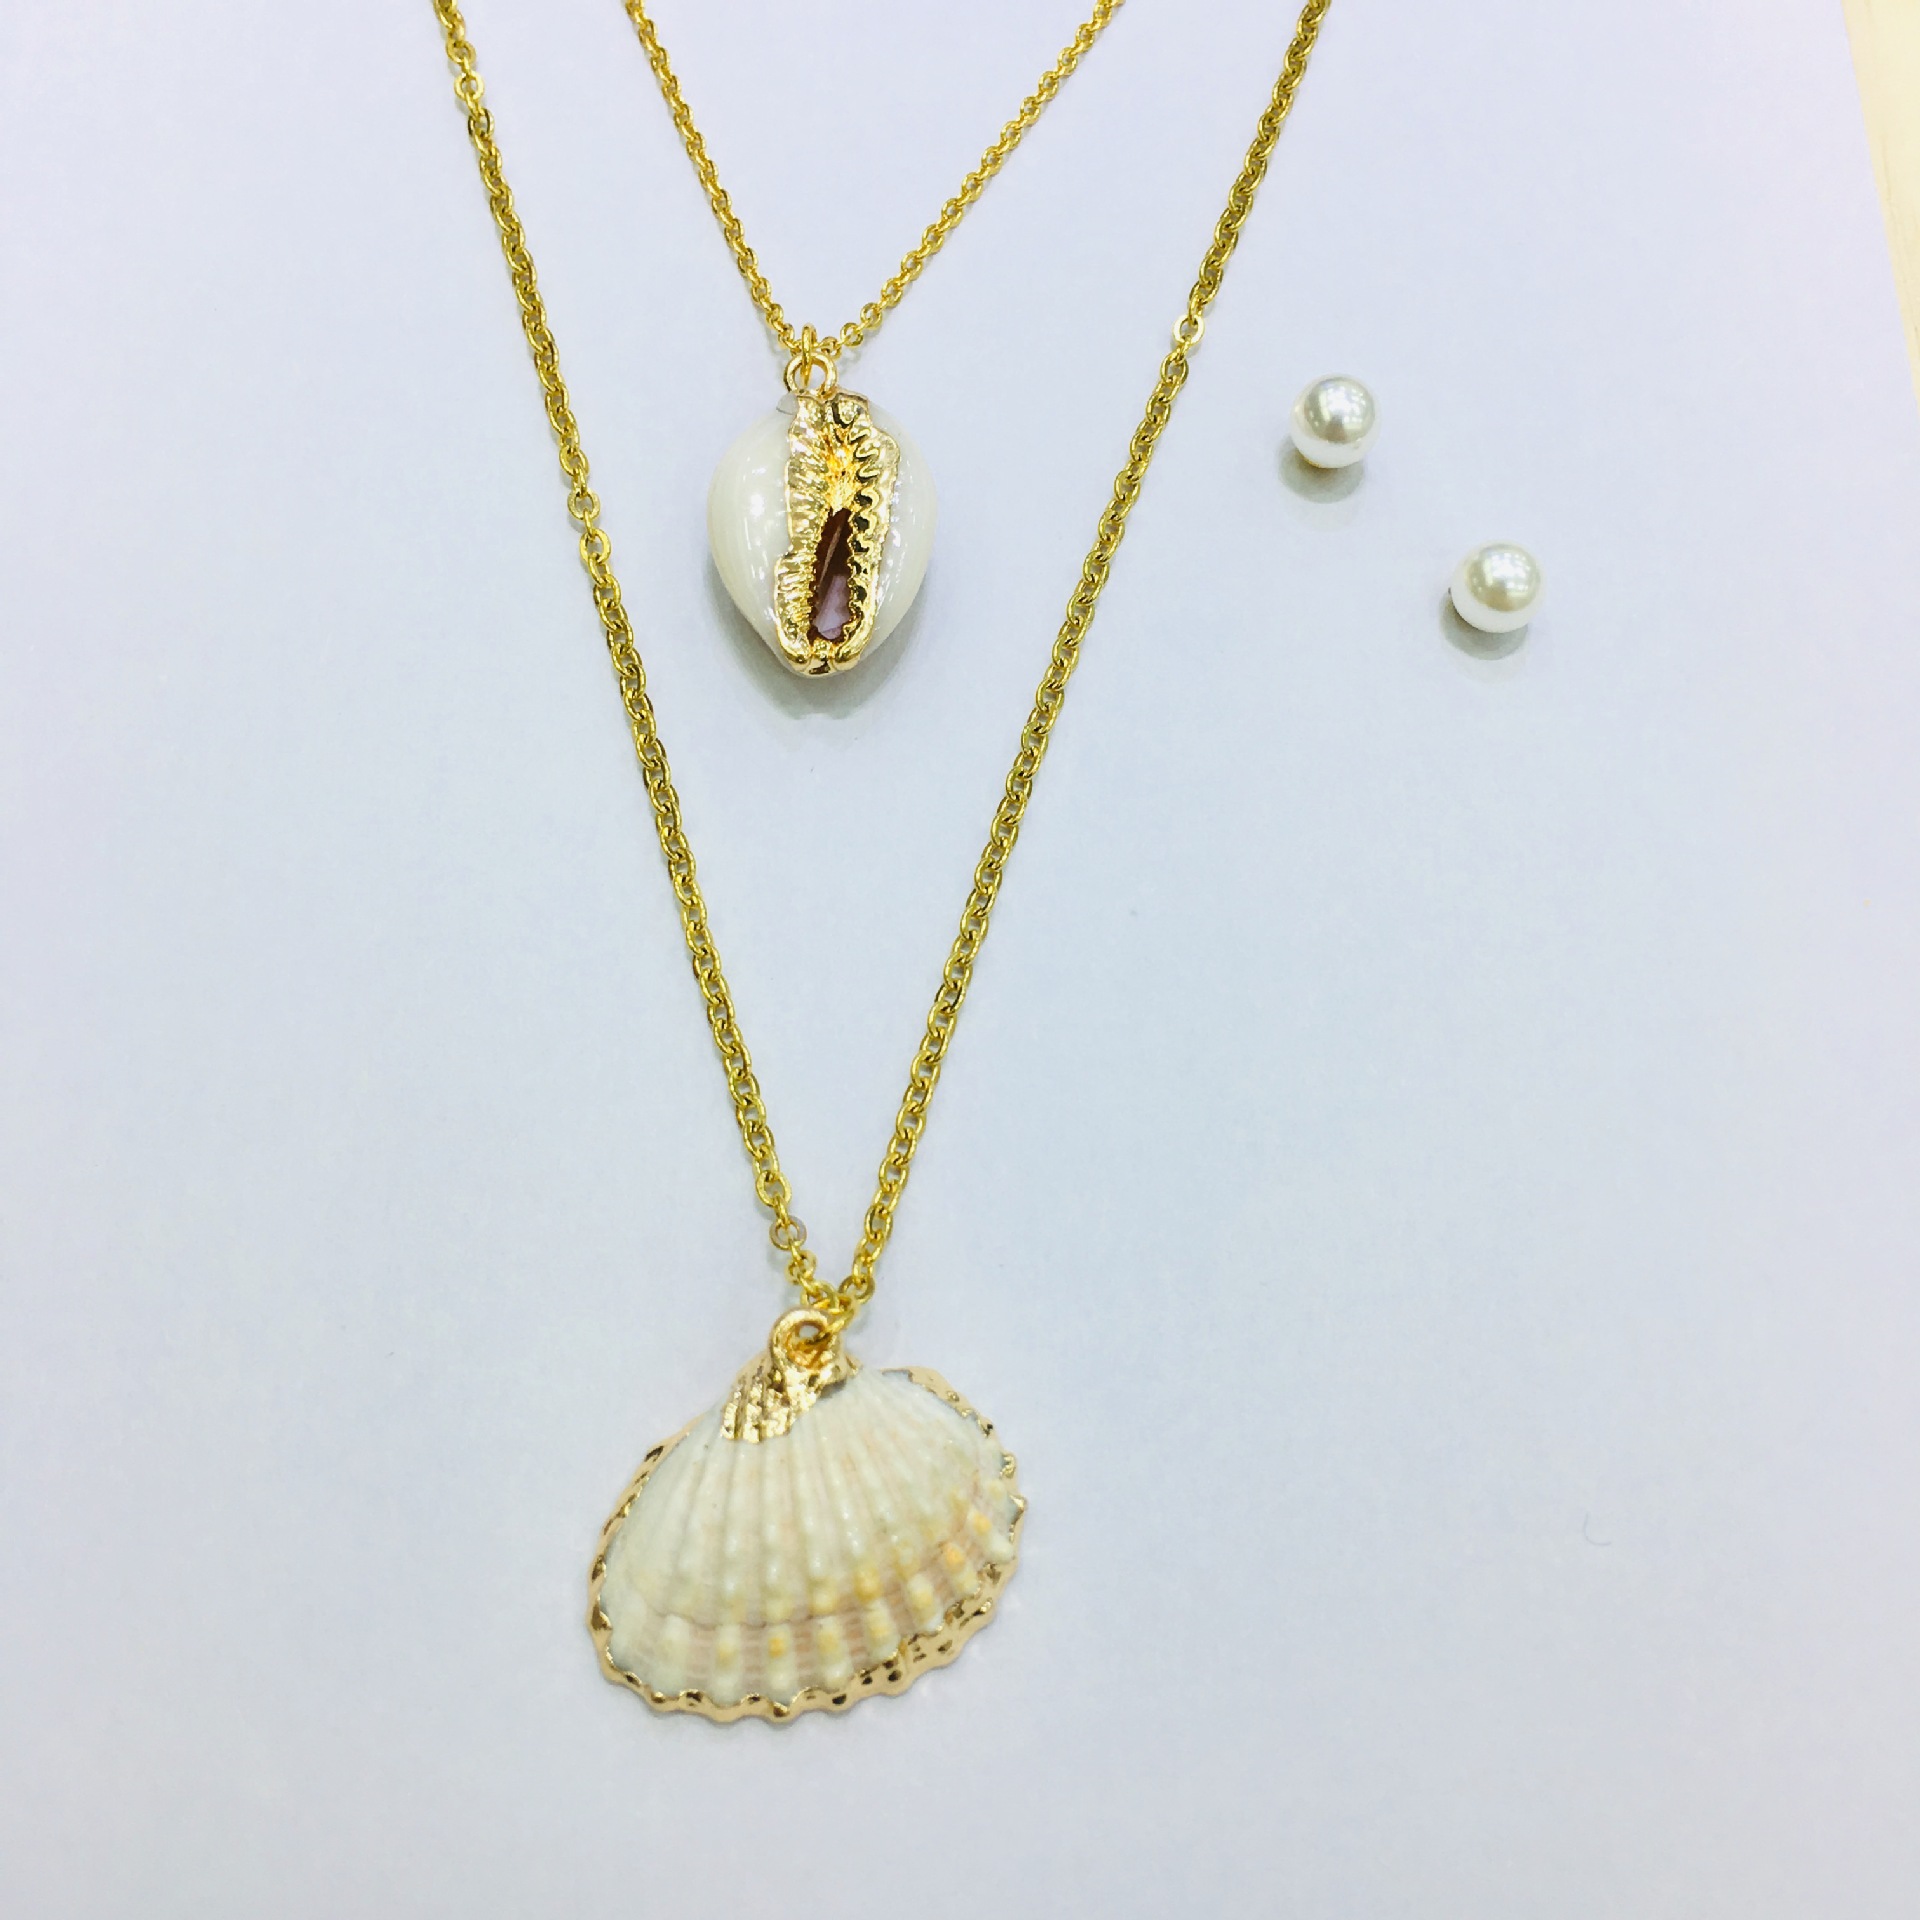 Stainless Steel Gold Plated Sea Shell Heart Necklace Earring Jewelry Set